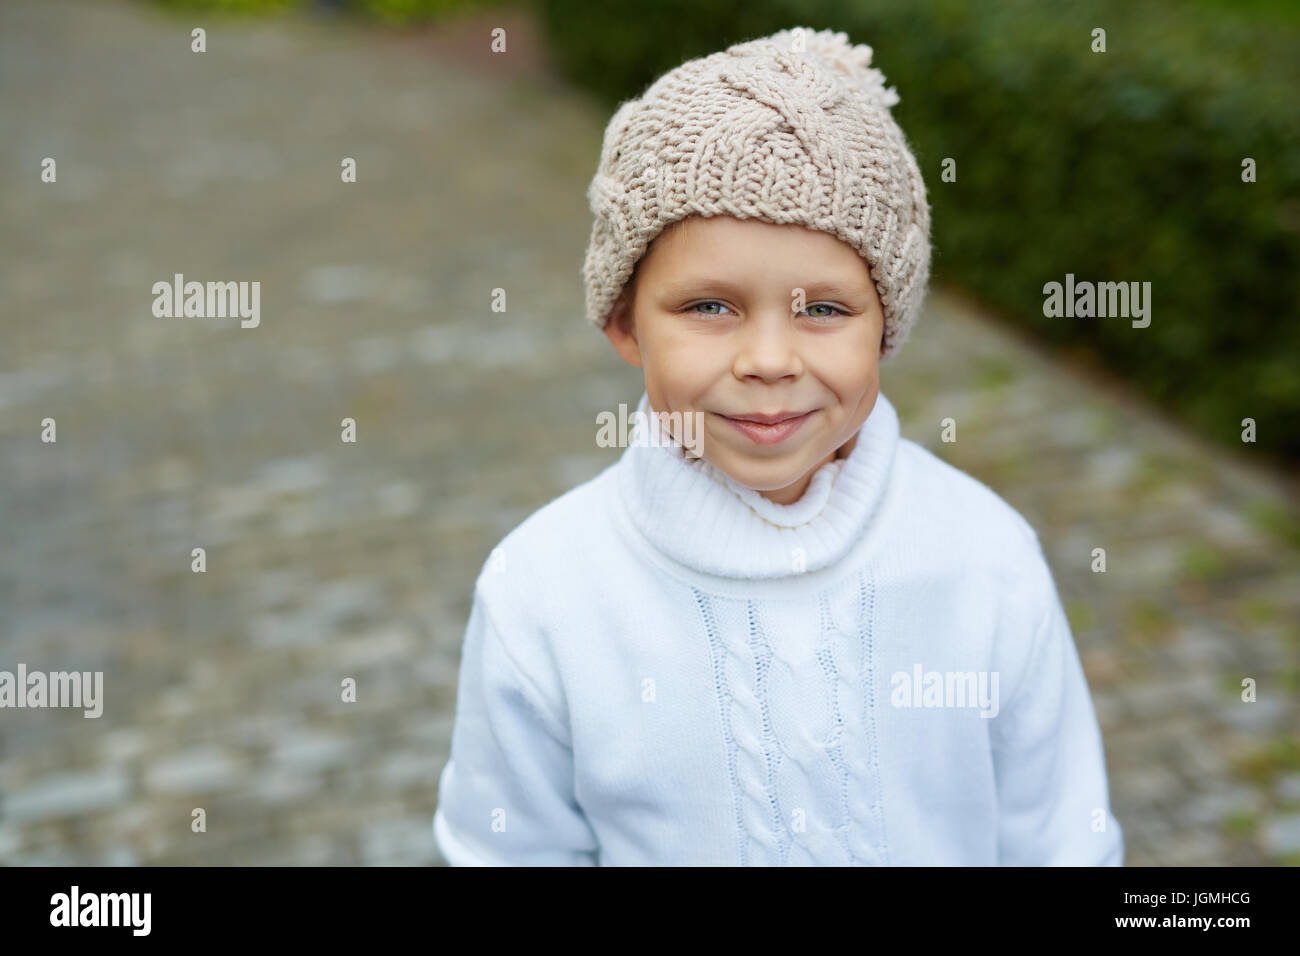 Portrait of cute blue eyed little boy wearing knit hat and sweater posing looking at camera on warm autumn day Stock Photo